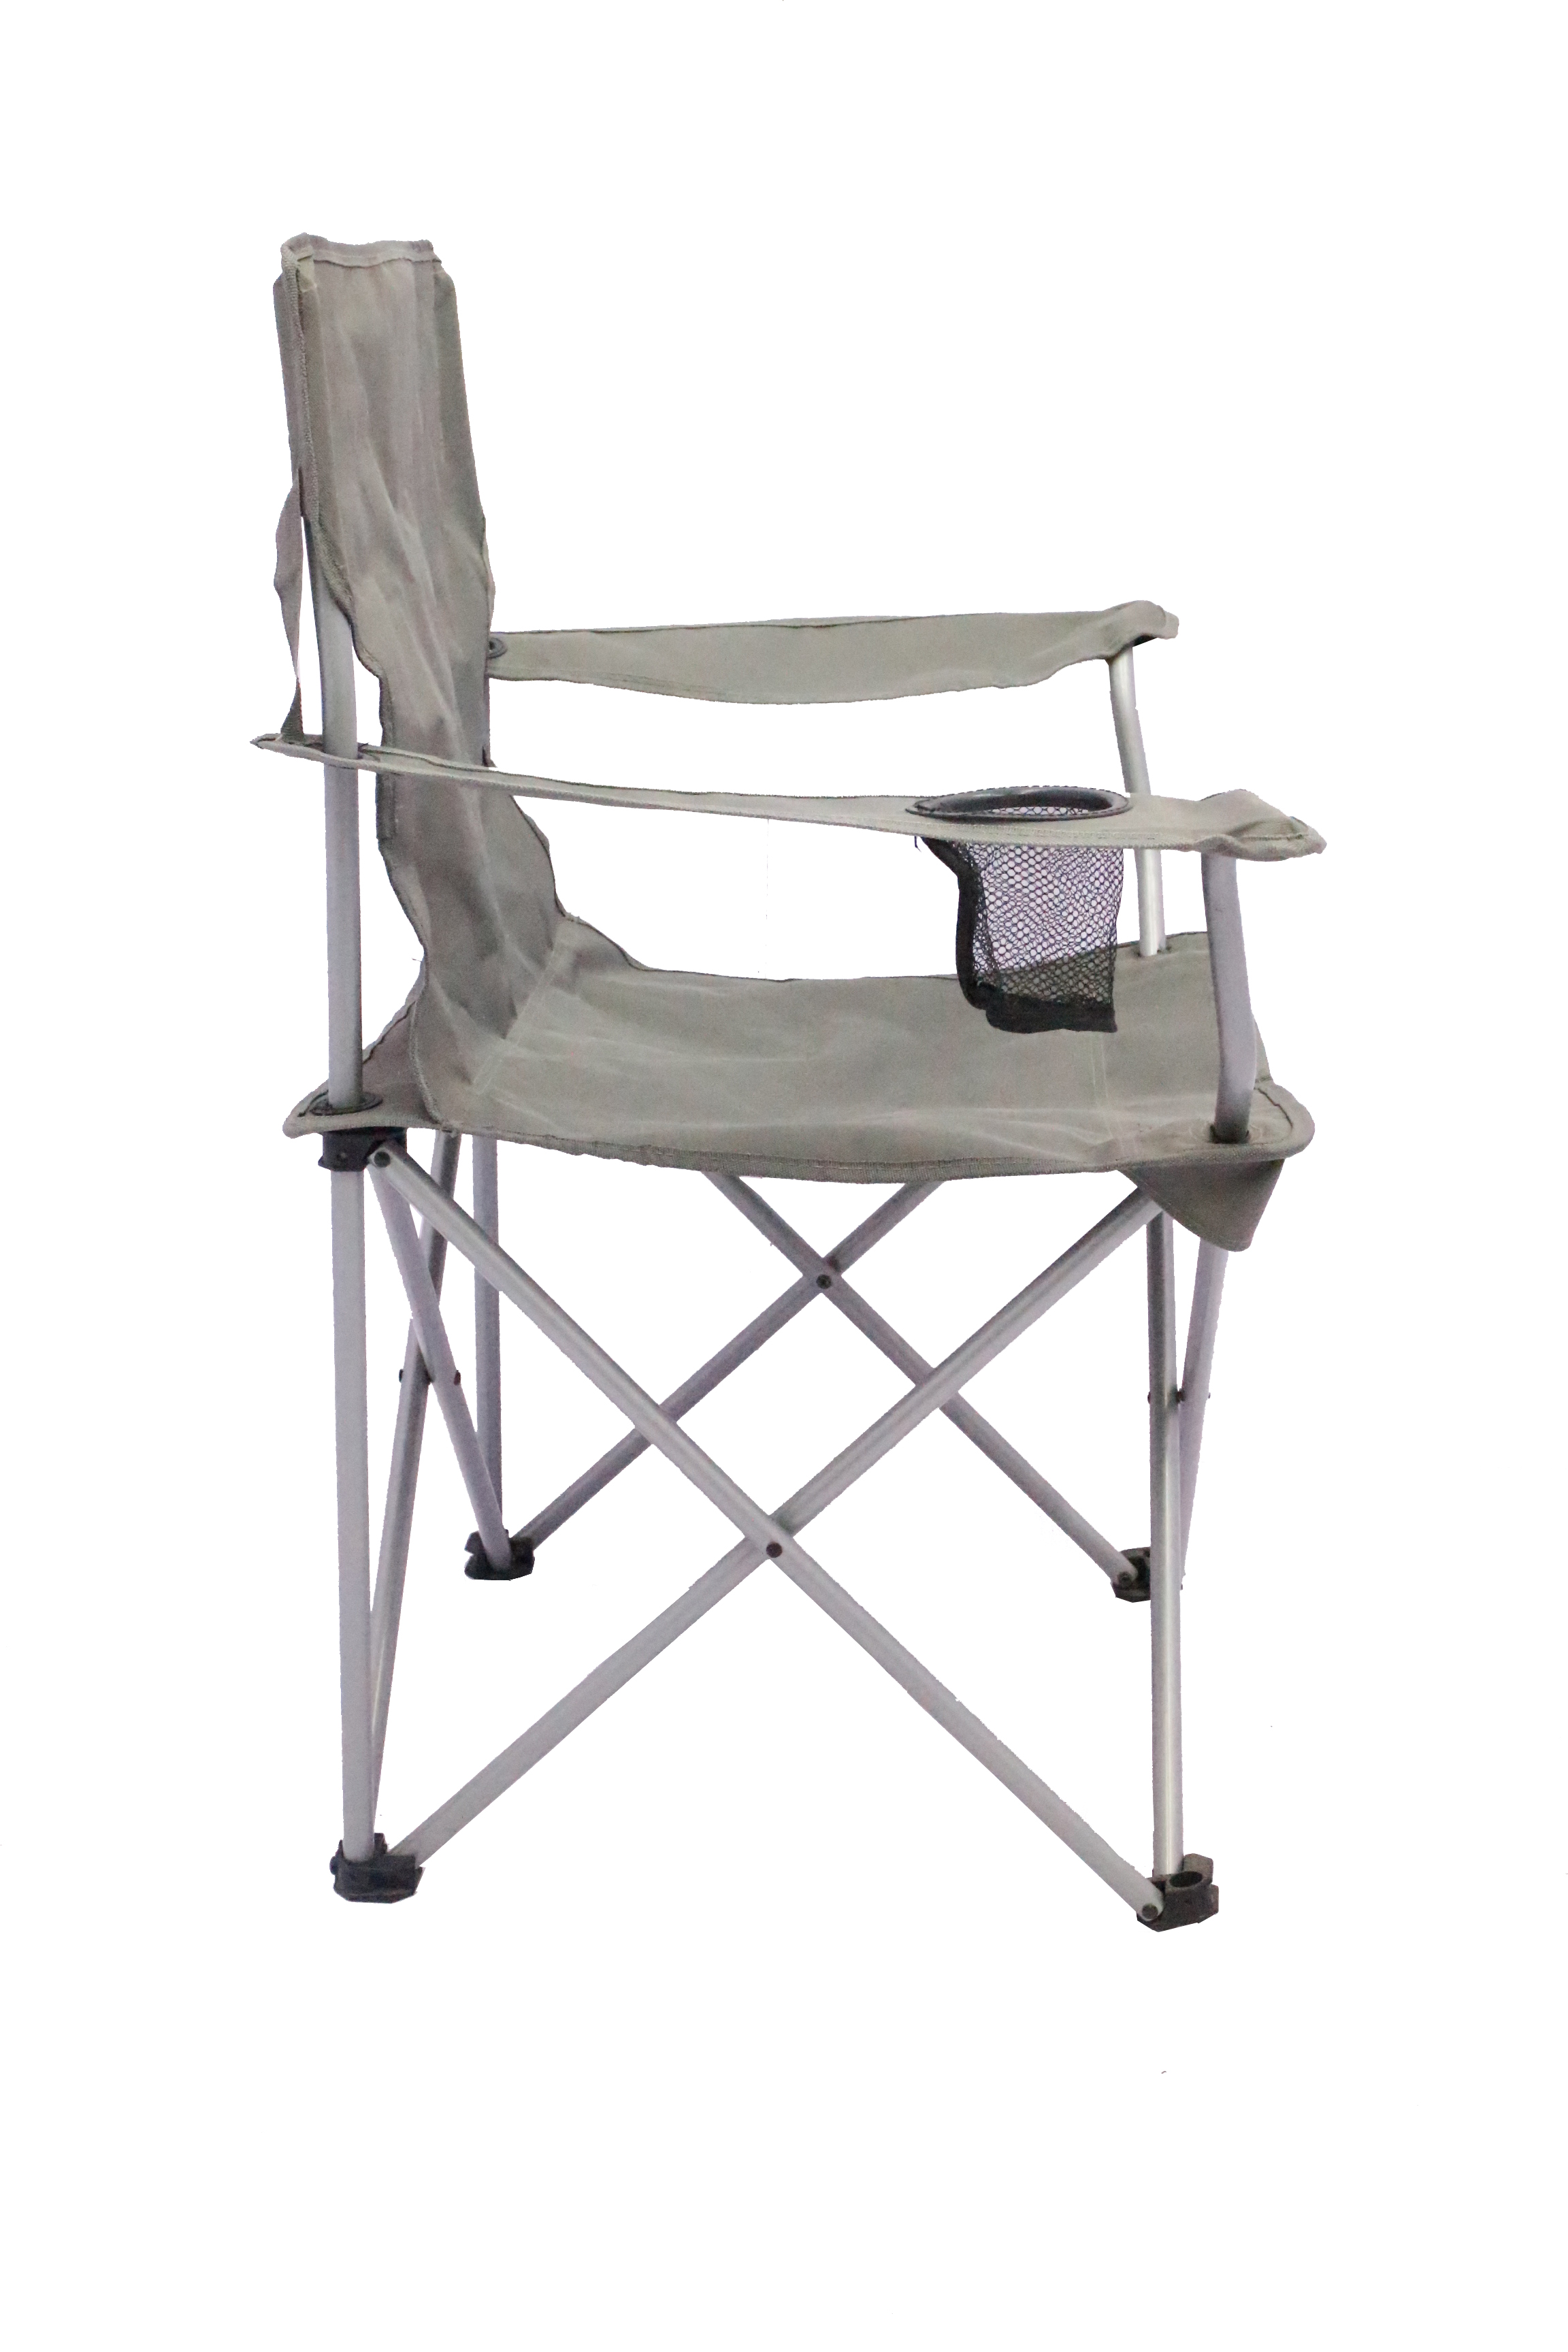 Ozark Trail Quad Folding Camp Chair 2 Pack,with Mesh Cup Holder - image 8 of 17